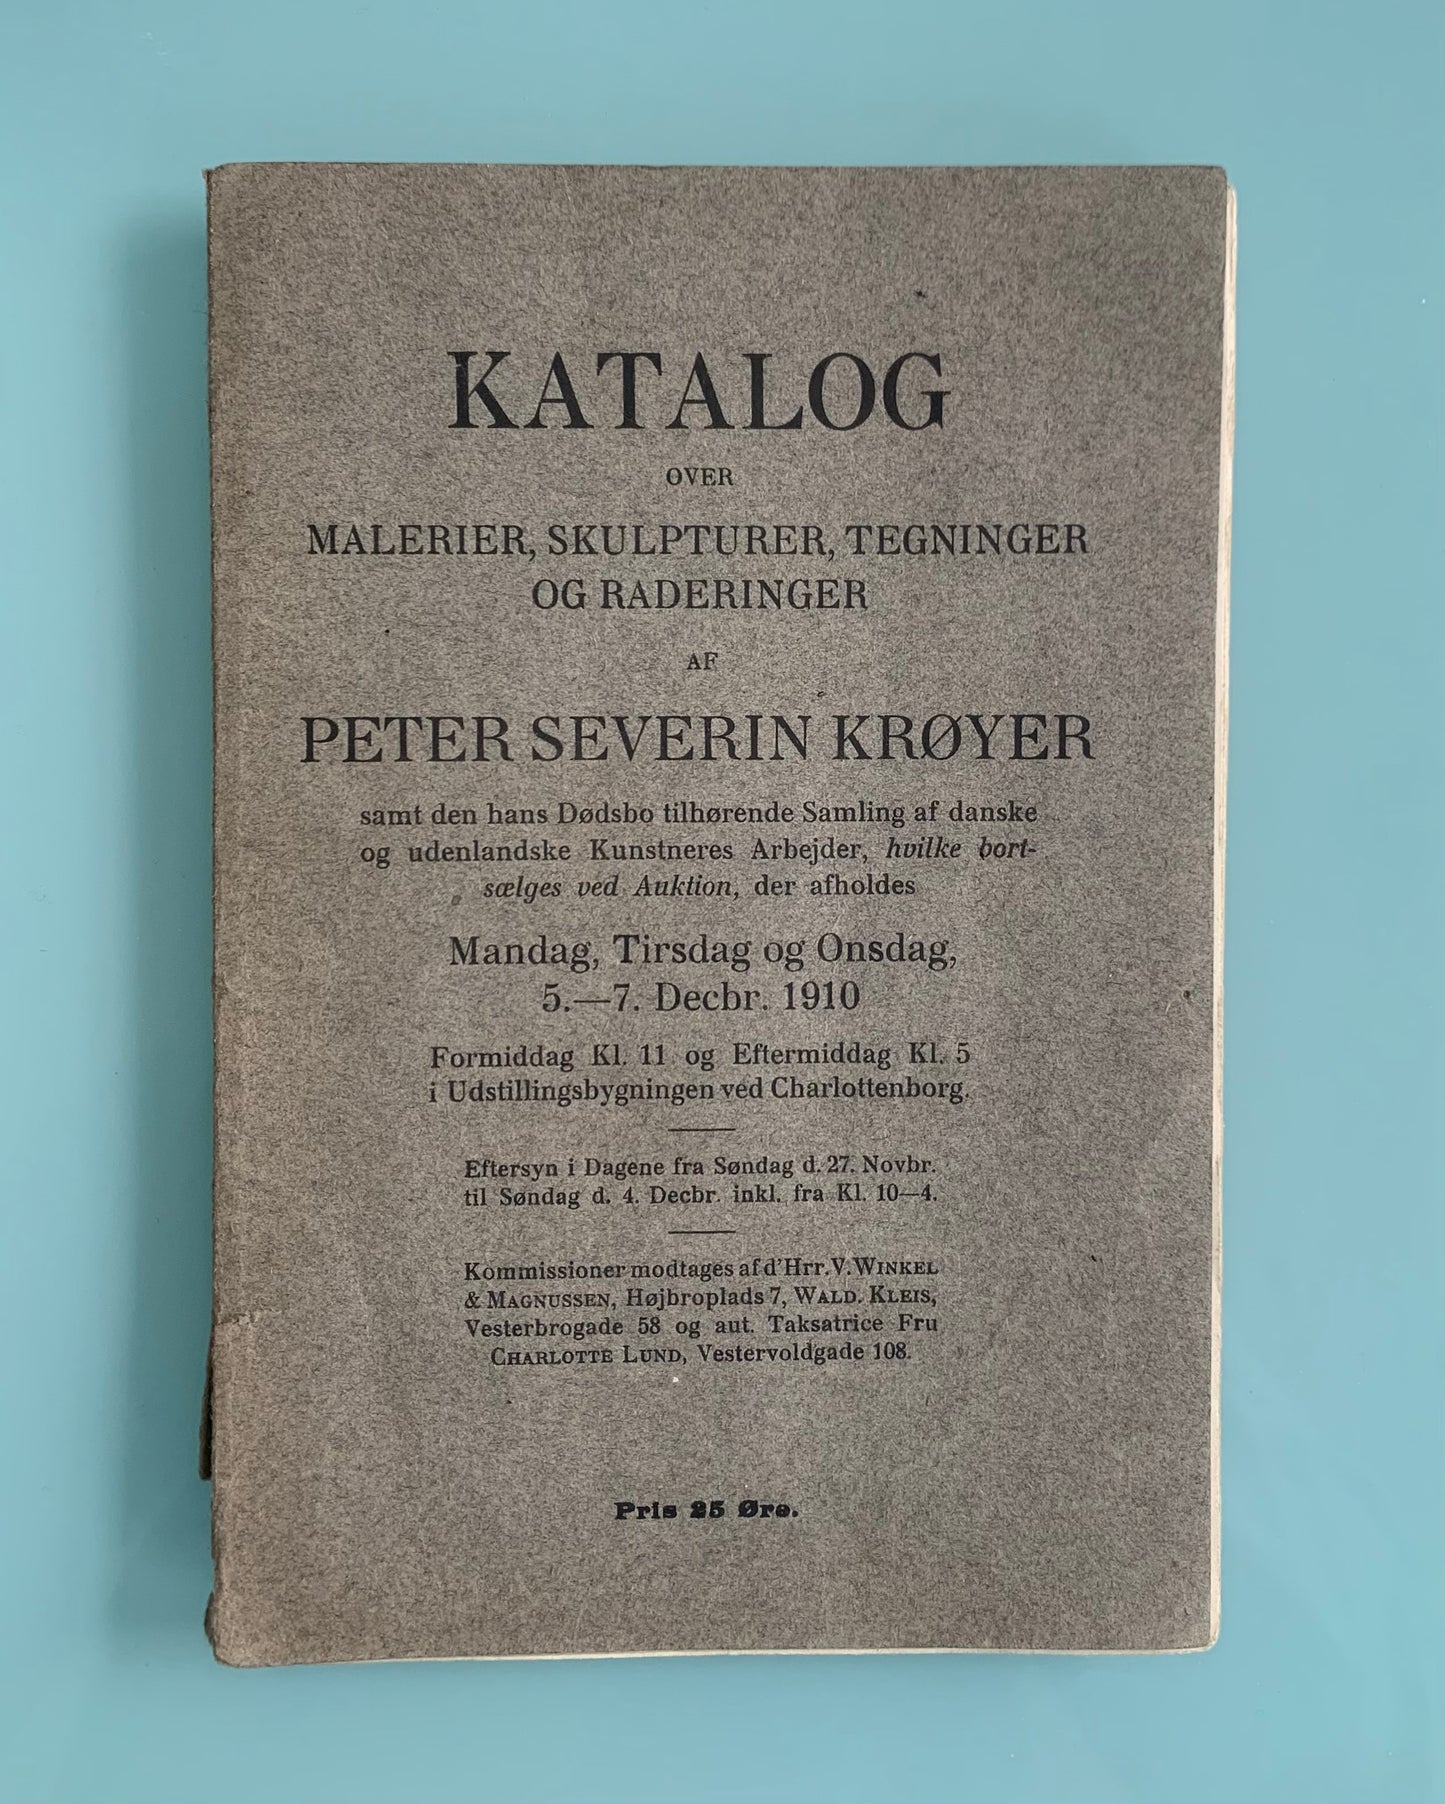 PS Kroyer. Catalog from the artists estate auction, 1910